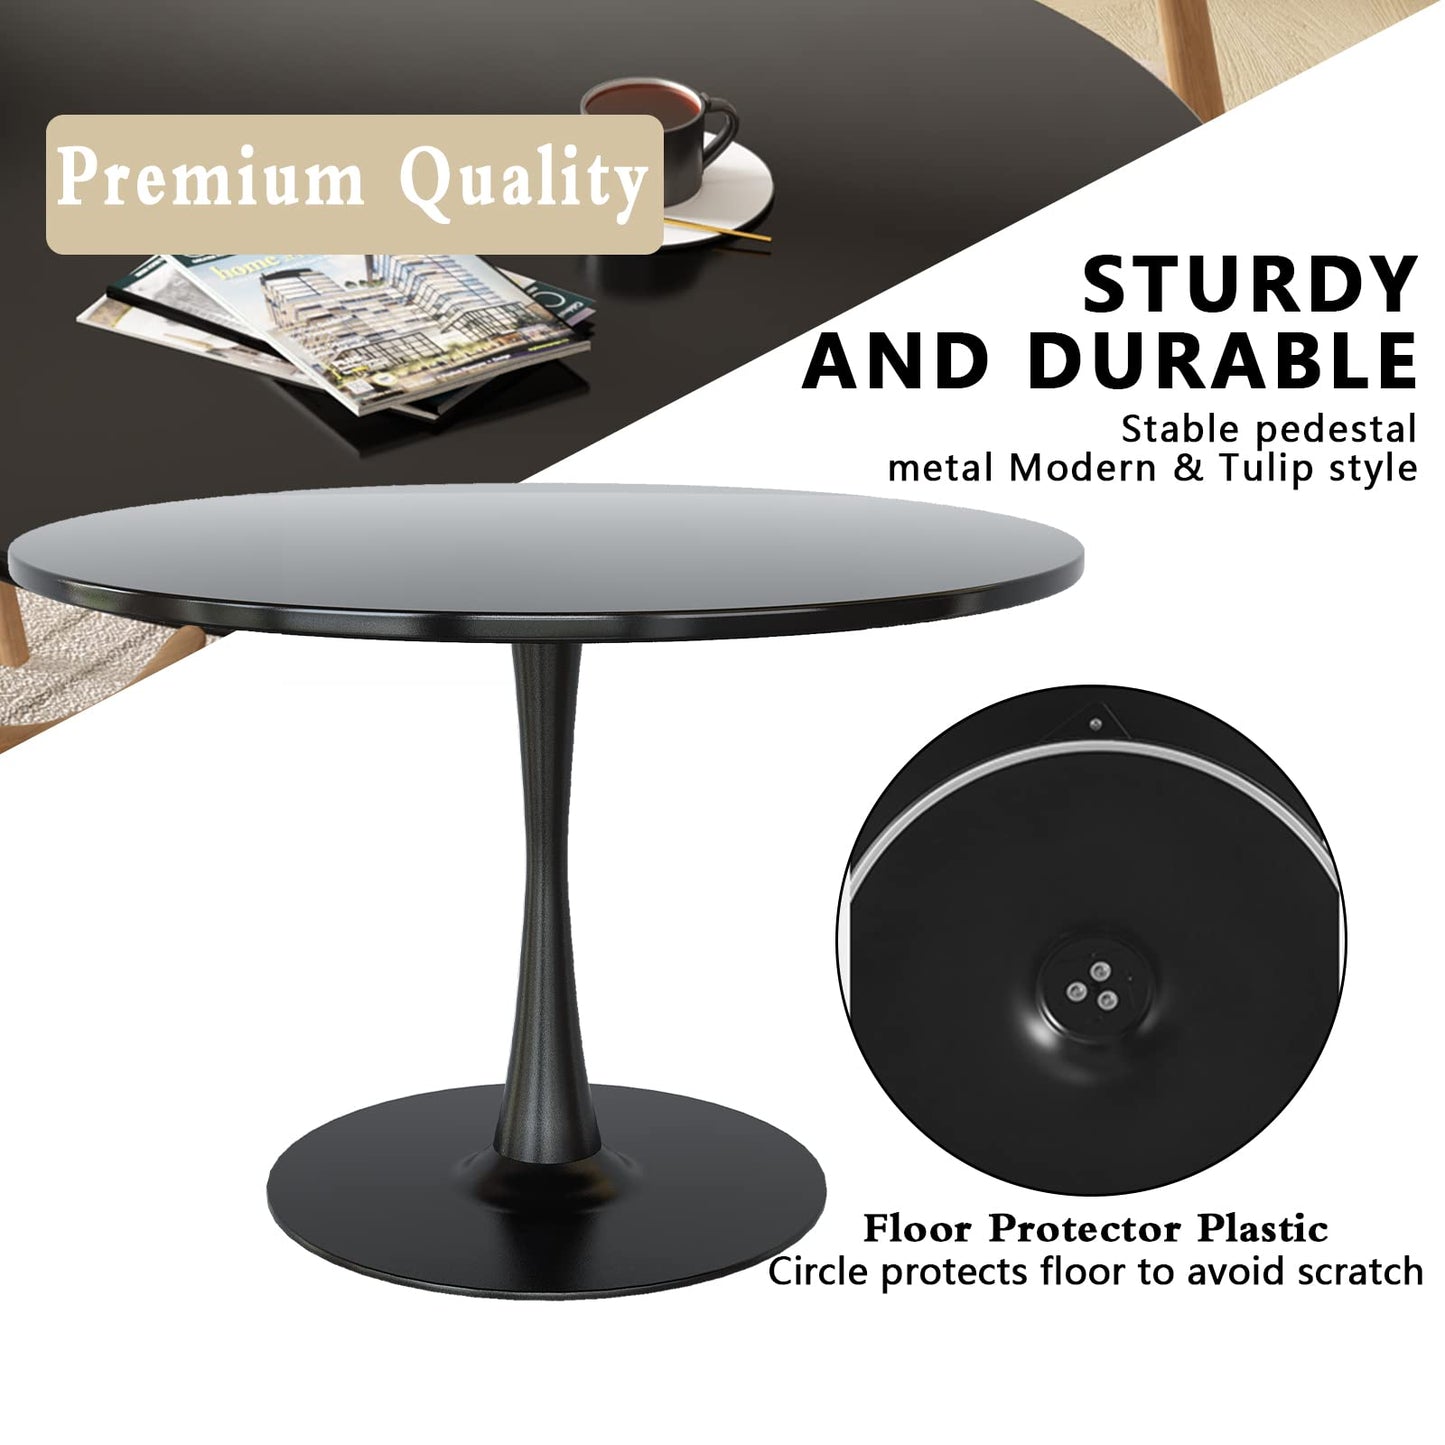 DKLGG Black Round Dining Table, 42.1" Tulip Table Kitchen Dining Table 4-6 People with MDF Table Top & Pedestal Base, Mid-Century End Table Leisure Coffee Table Office Living Room Table